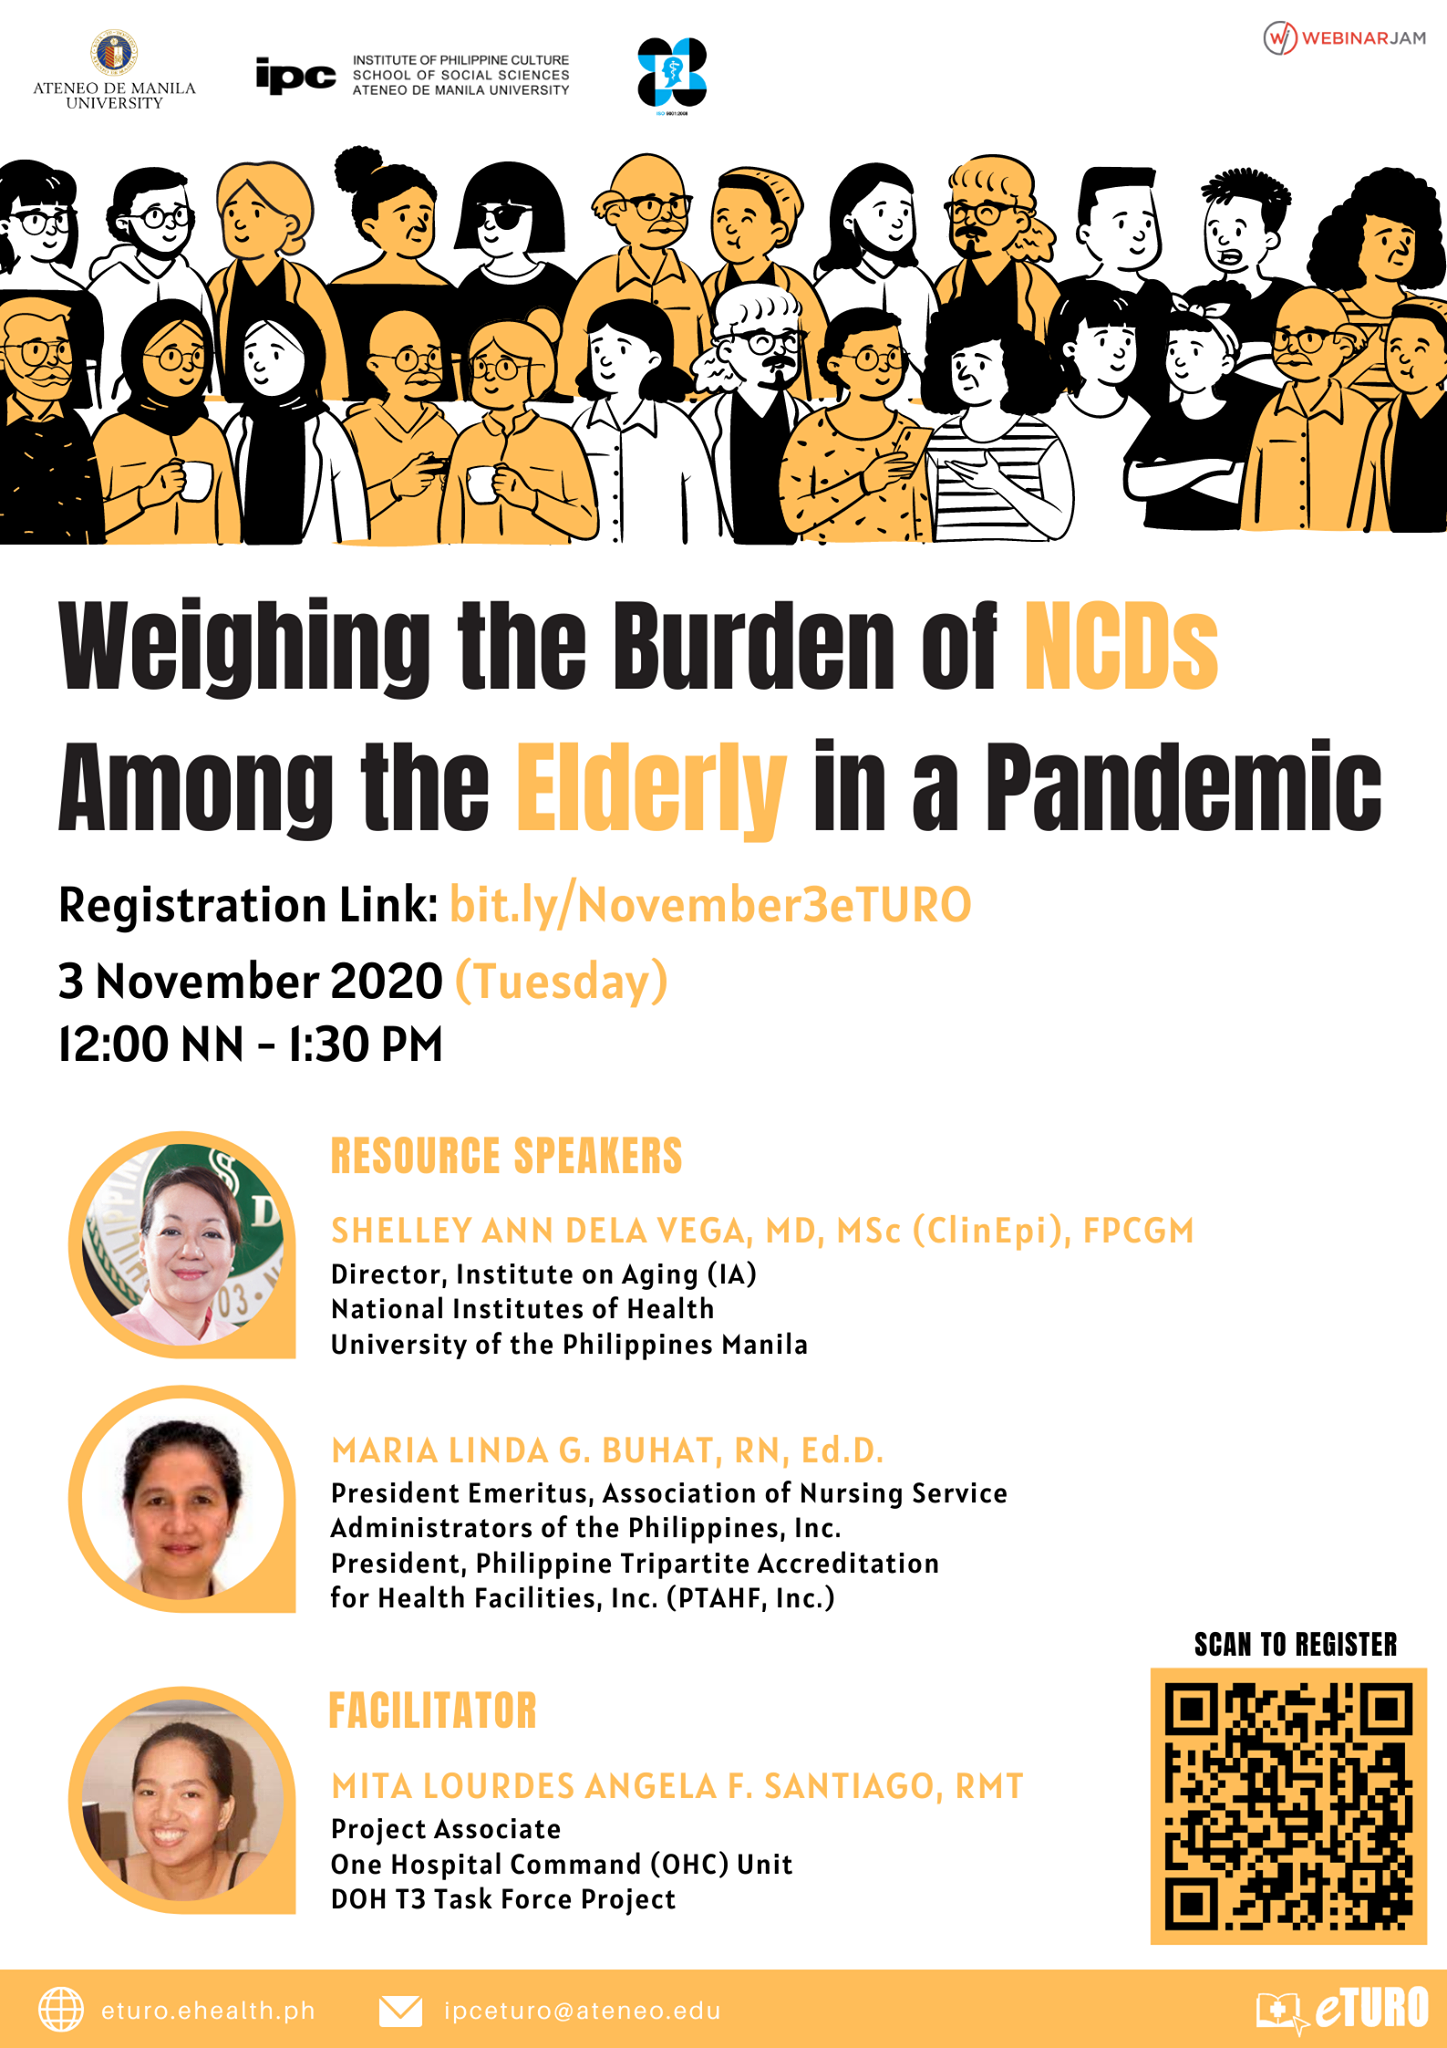 Weighing the Burden of NCDs Among the Elderly in a Pandemic